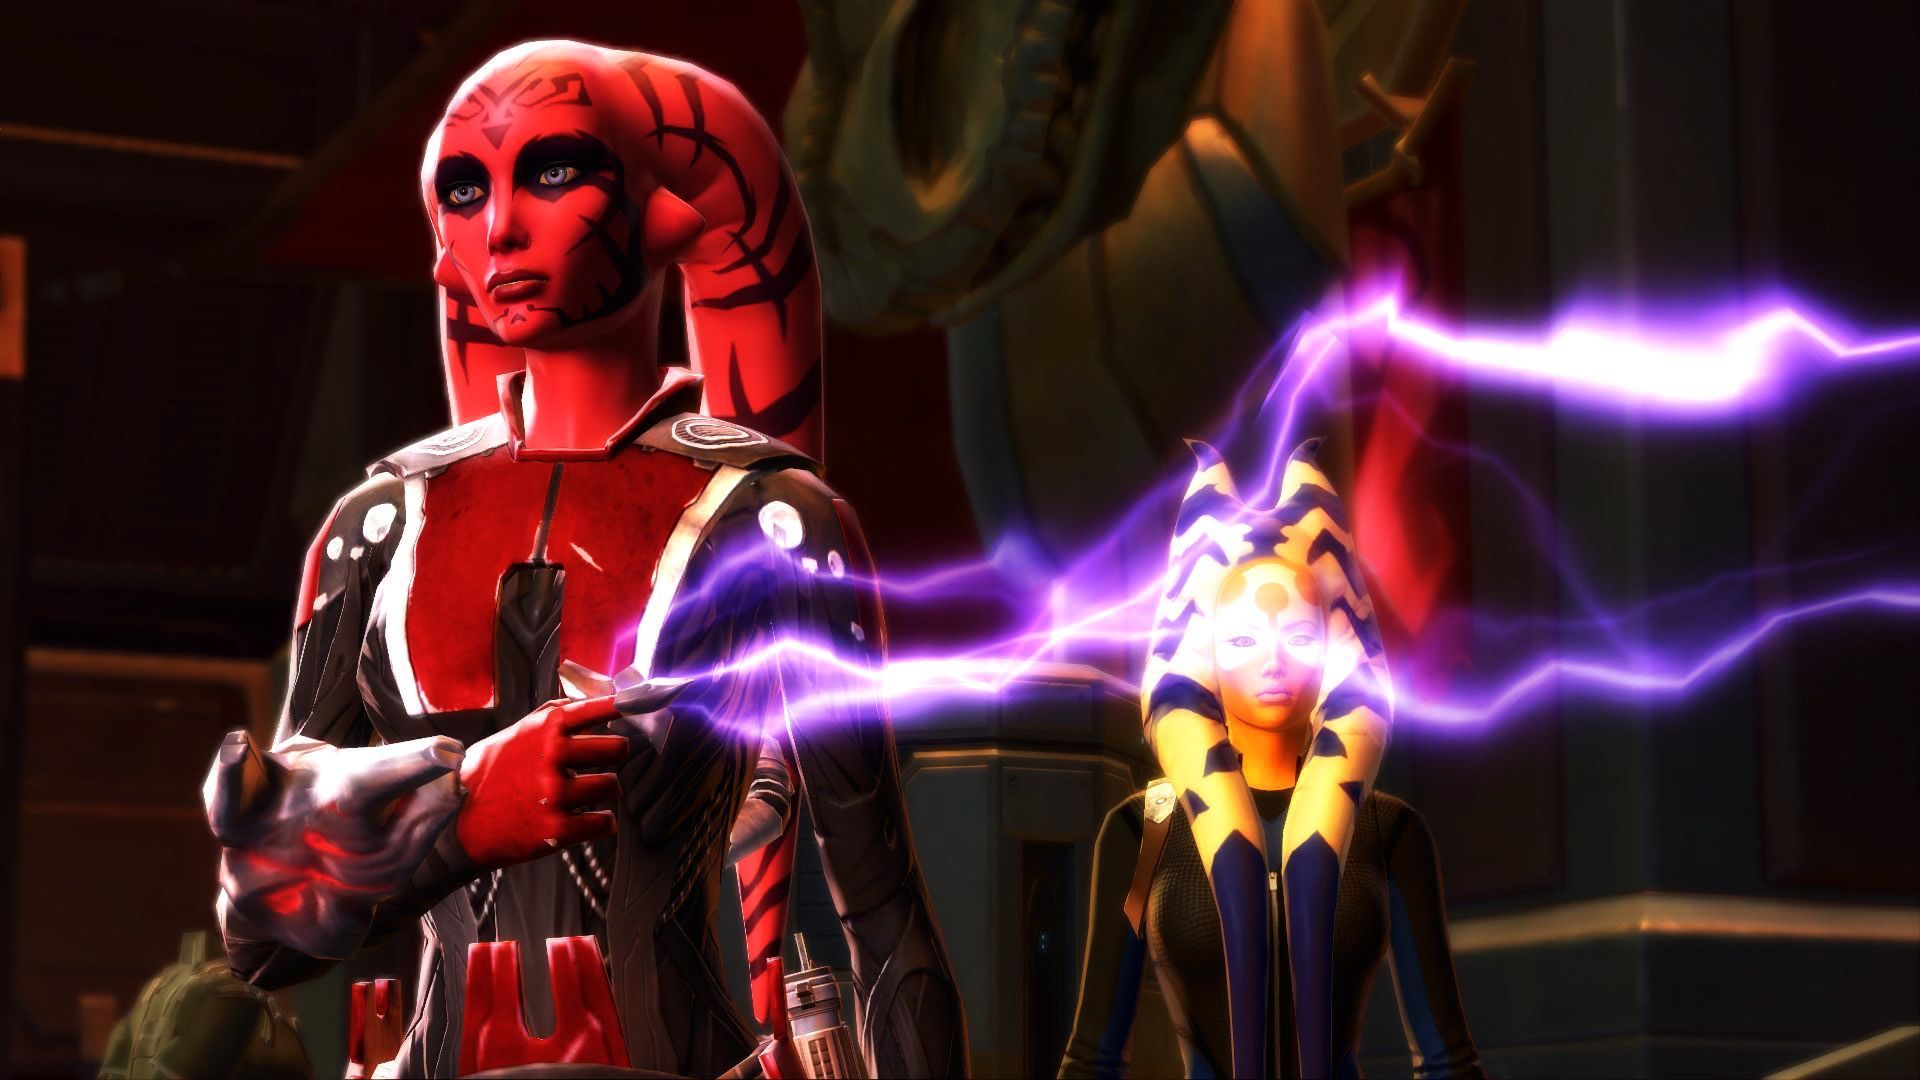 Wallpapers and User Interfaces on SWTOR - DeviantArt